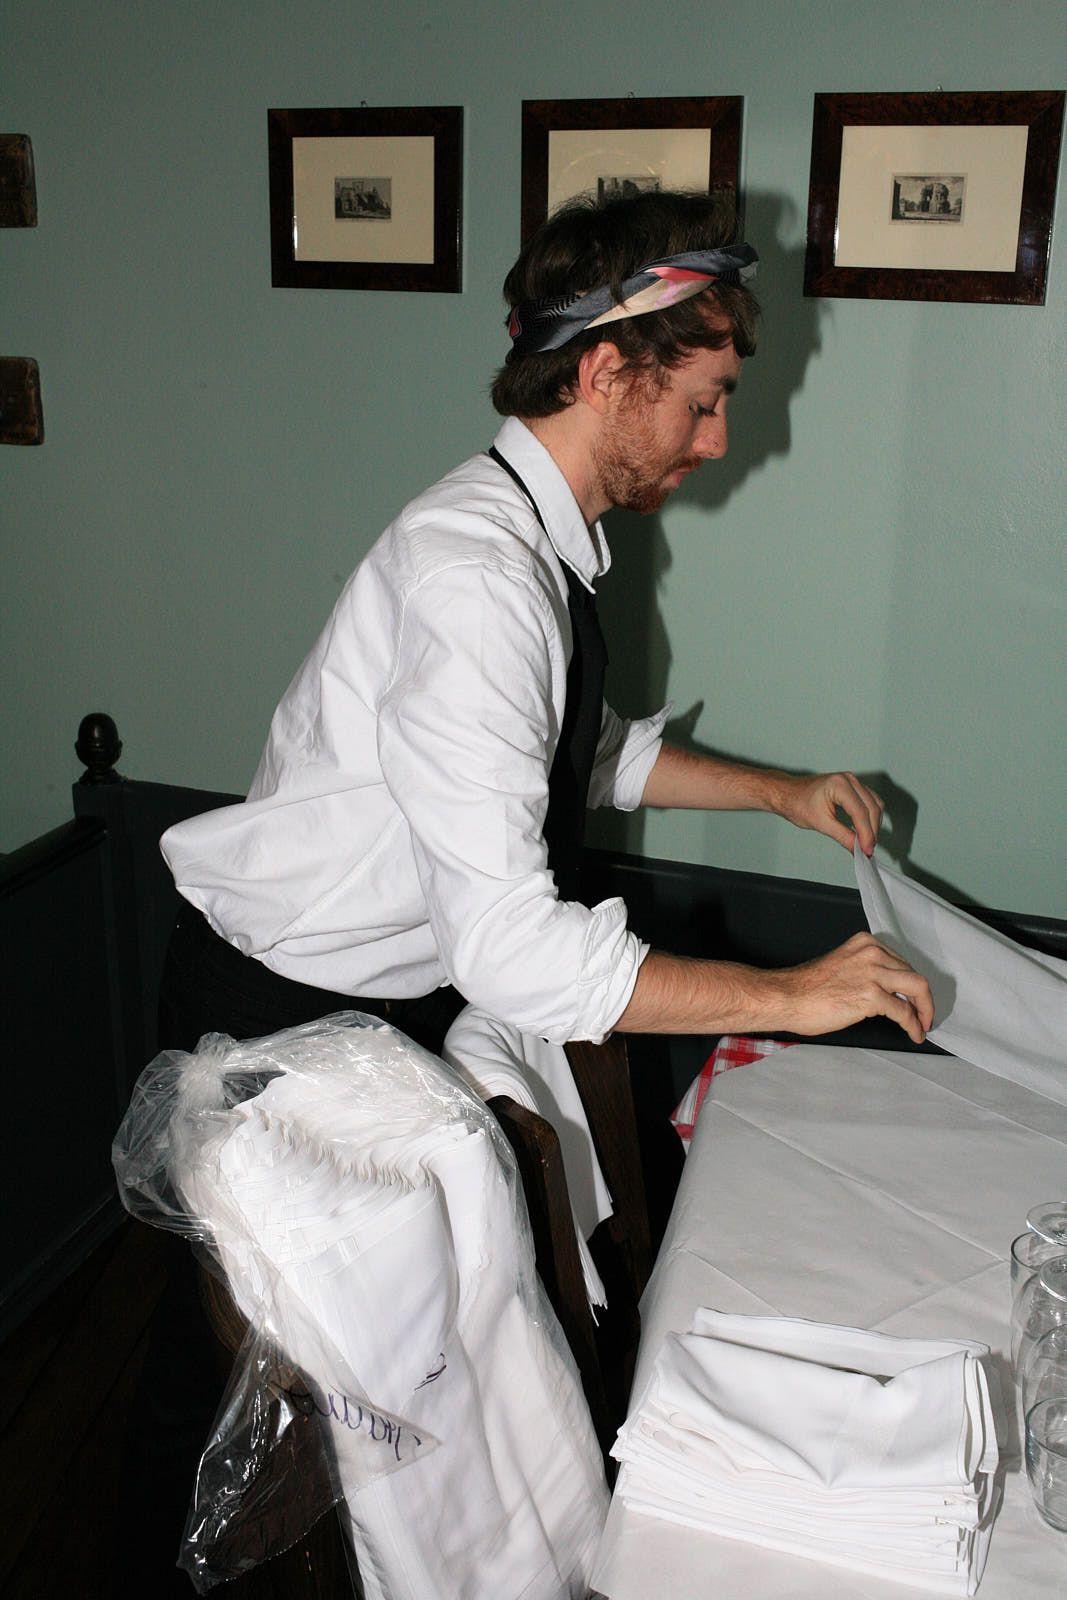 A waiter prepares napkins for service at Brutto, unfurling them before folding.